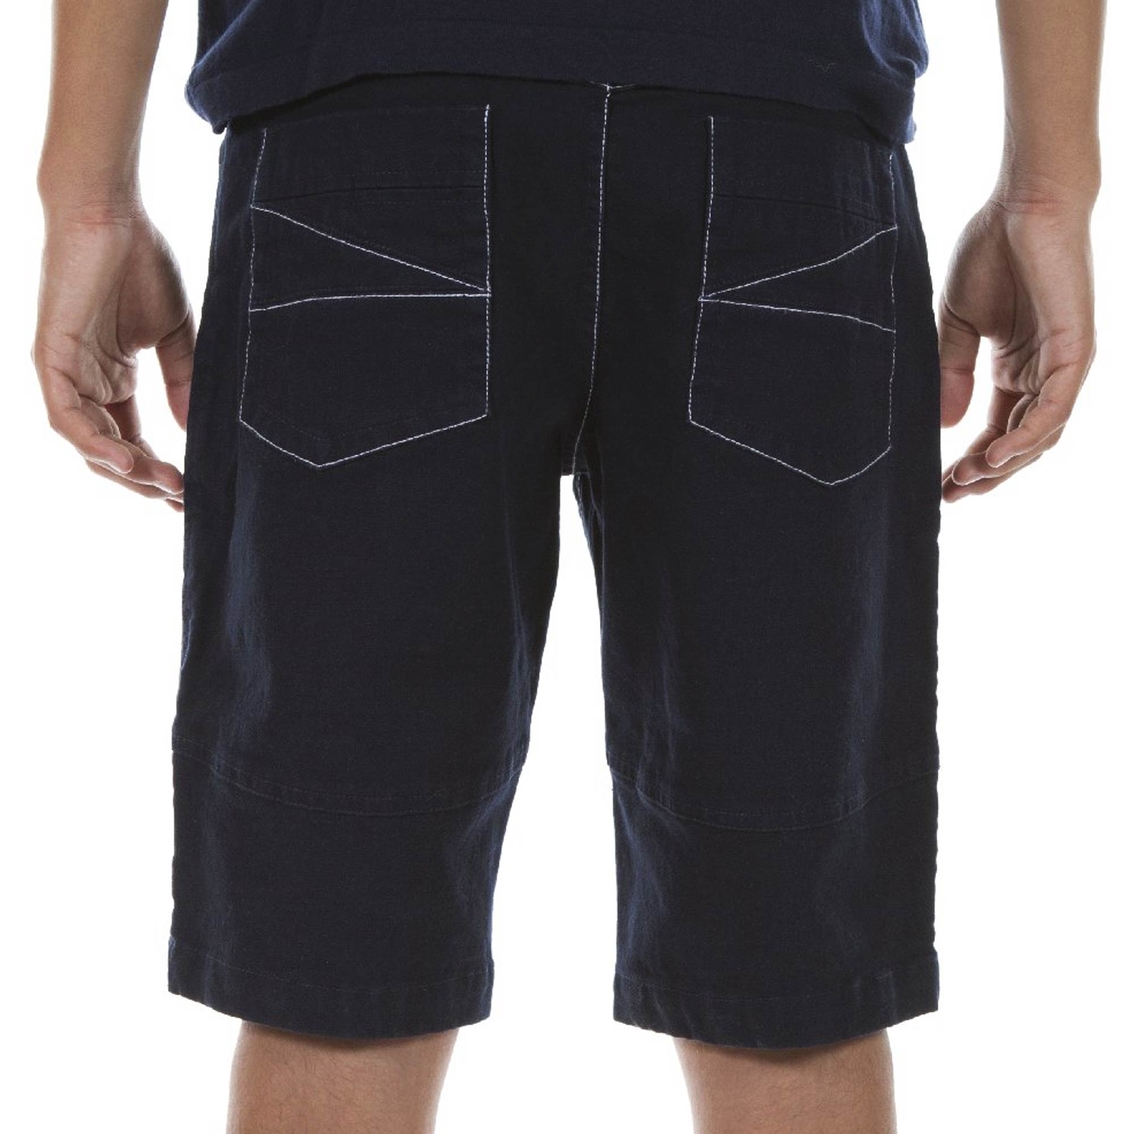 A.Tiziano Twill 15 in. Shorts - Image 2 of 4